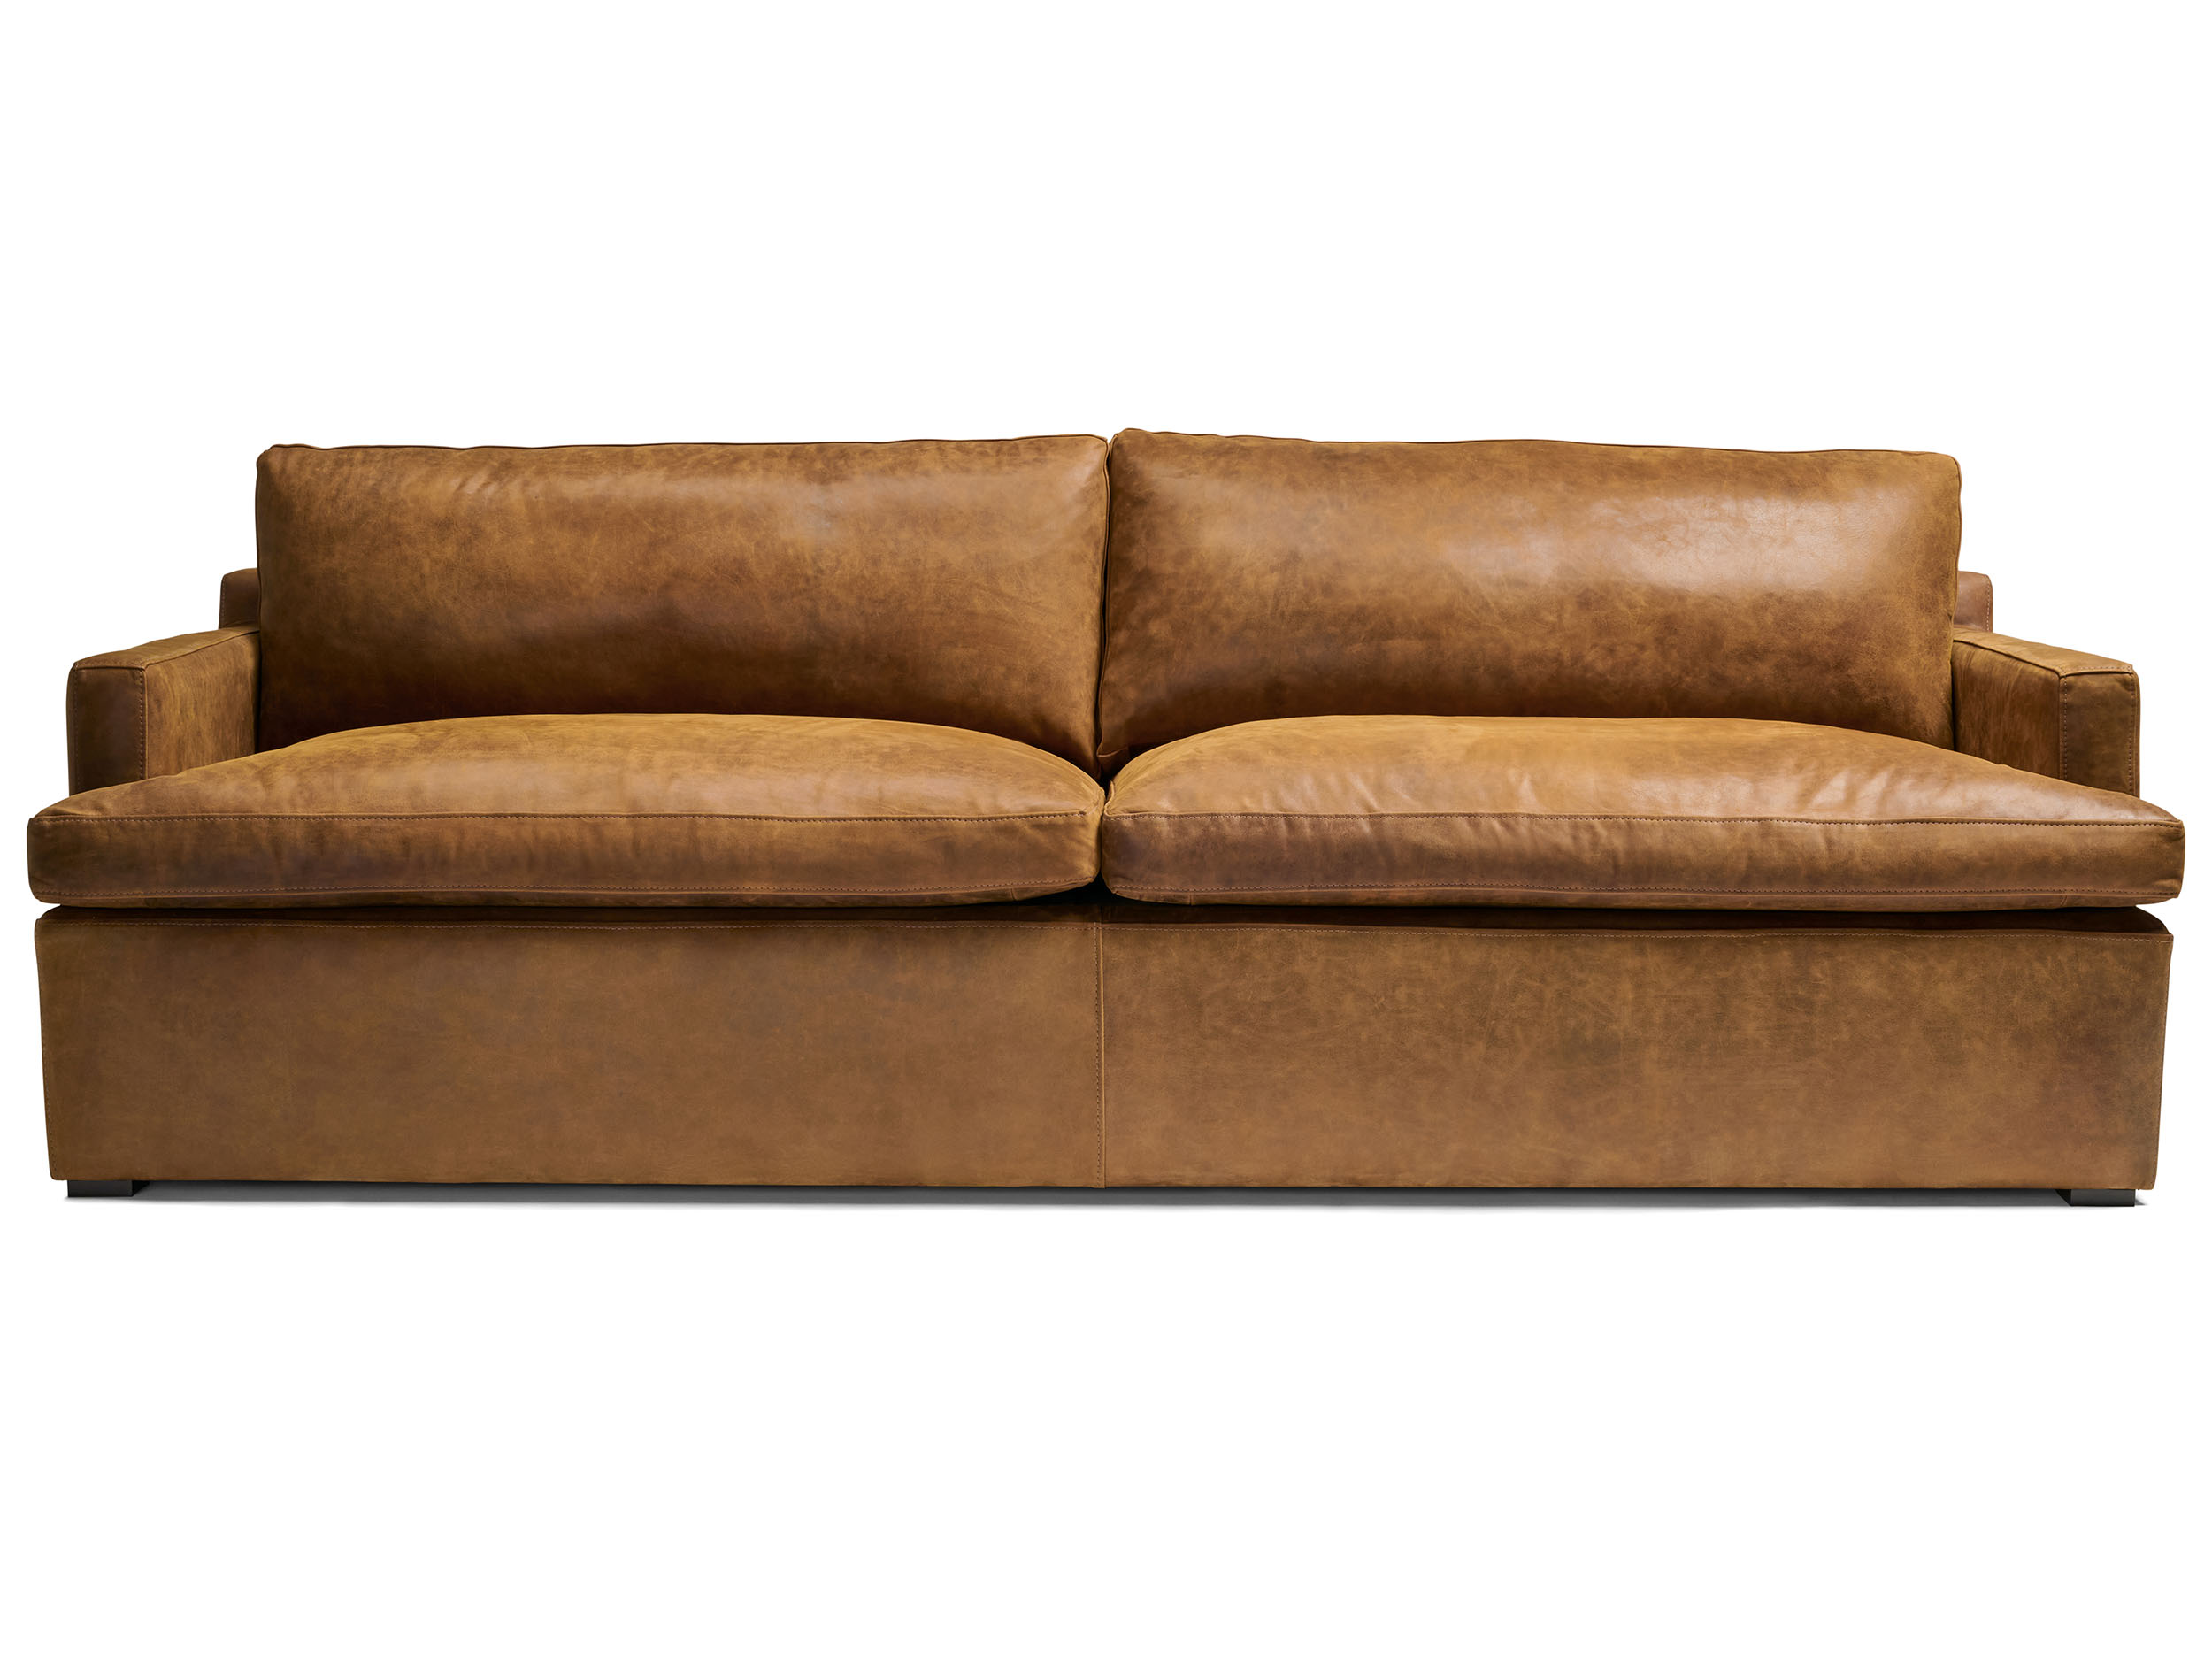 Muir Track Arm Leather Sofa - 96" x 40" - One only - In stock and ready to ship